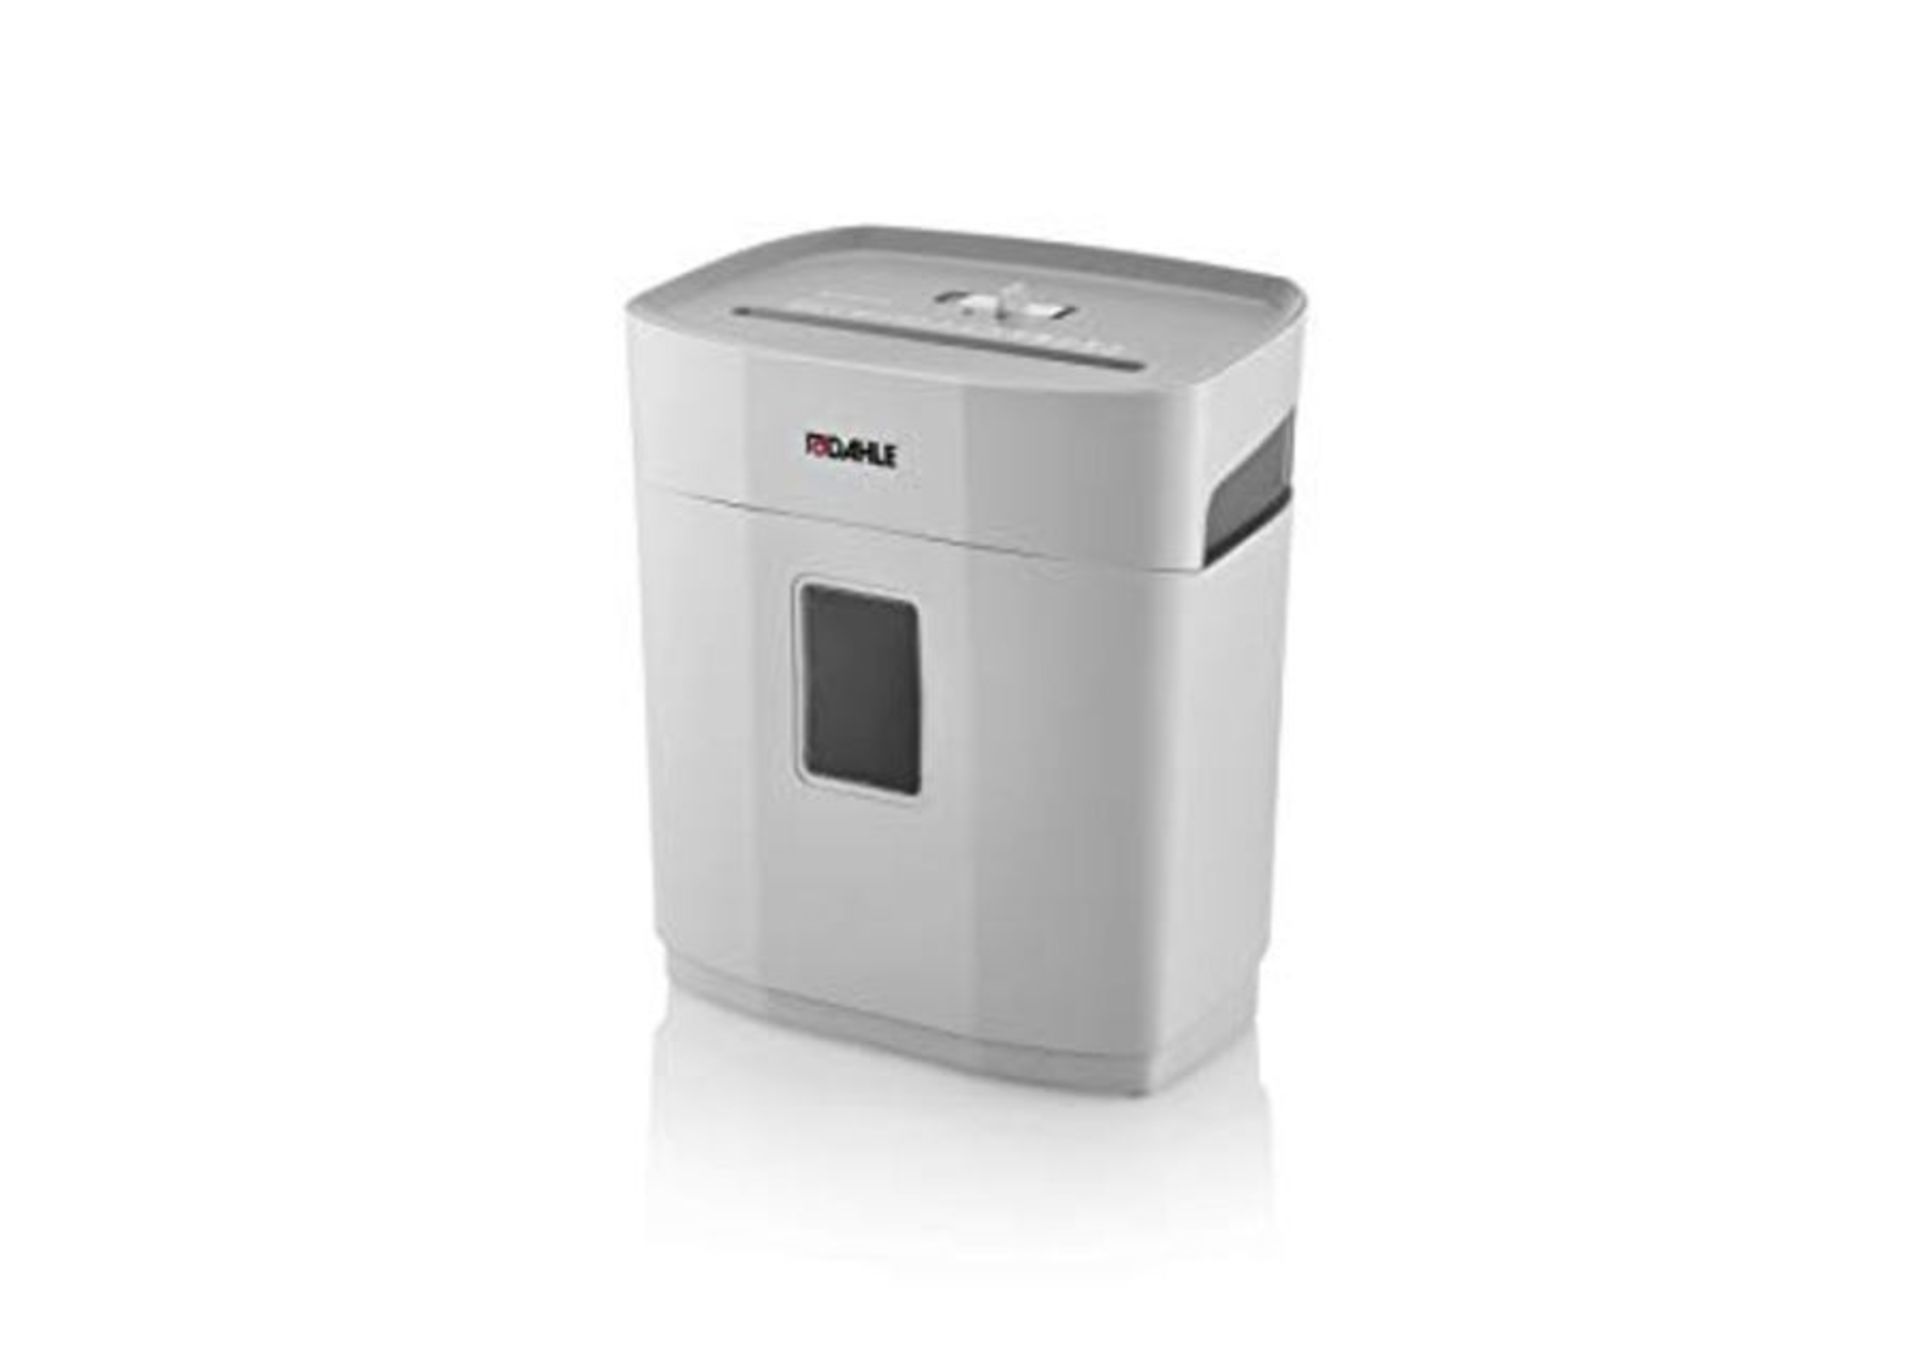 RRP £59.00 Dahle PaperSAFE 120 Paper Shredder (8 Sheets, Oil-Free, Jam Protection, Cross-Cut, for